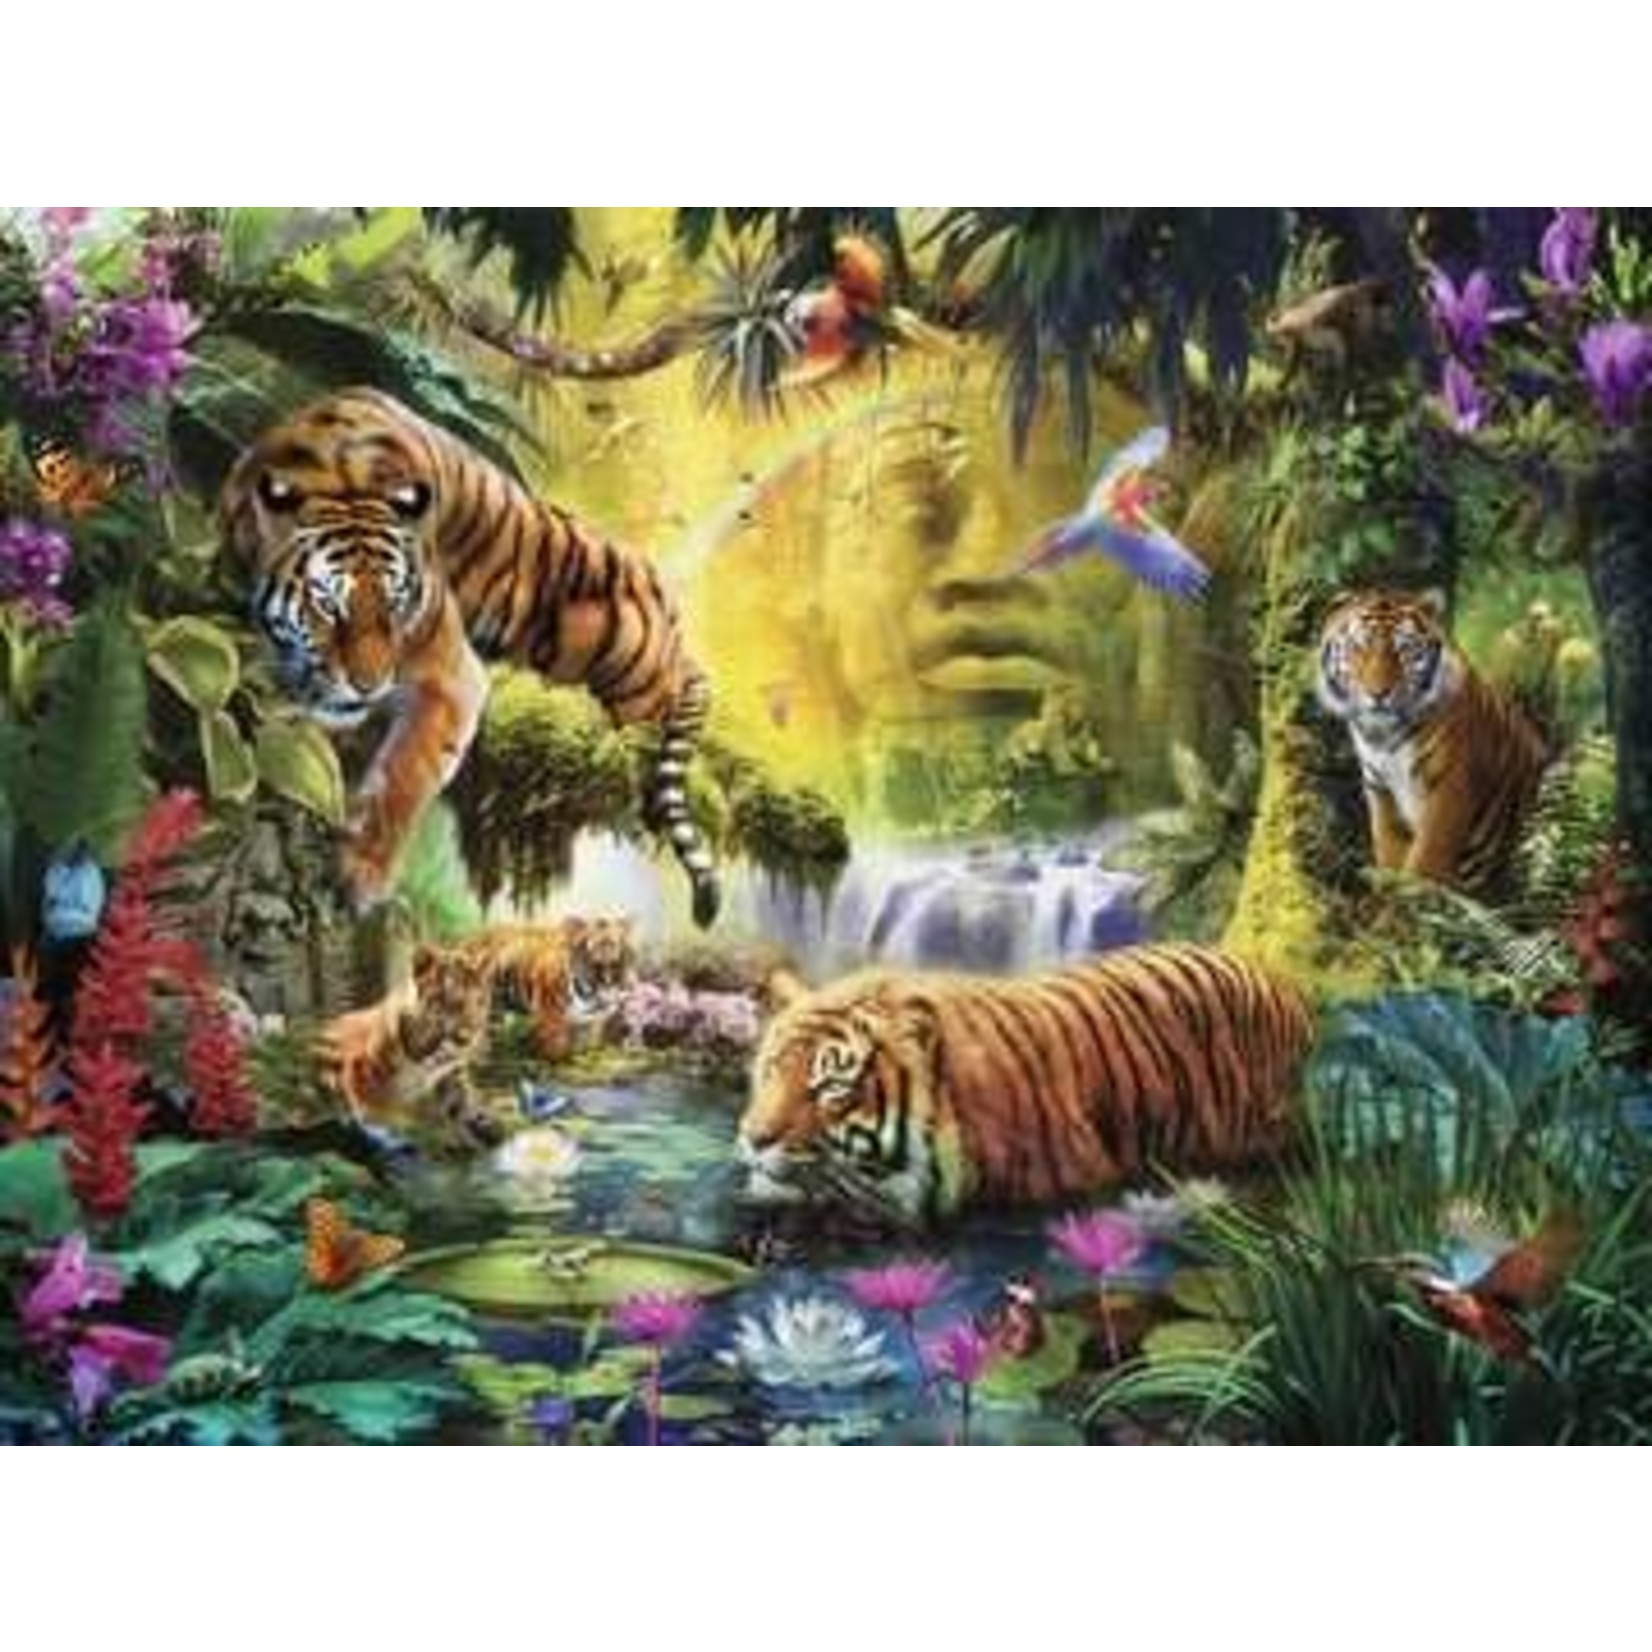 Tranquil Tigers 1500 Piece Puzzle